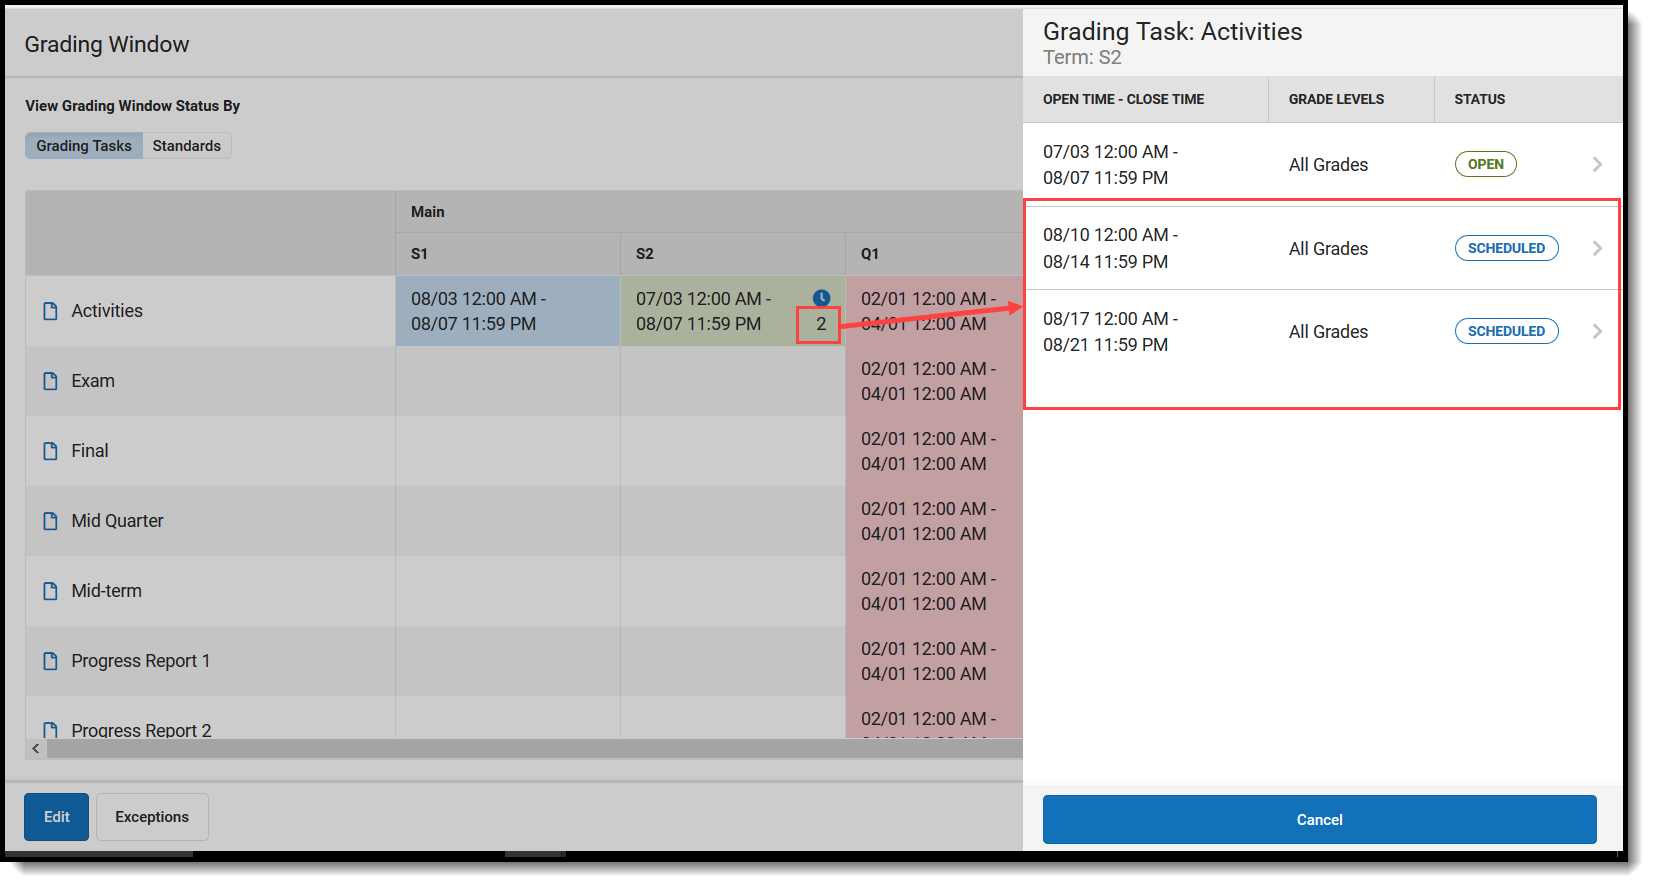 Screenshot showing what a future scheduled grading window looks like.